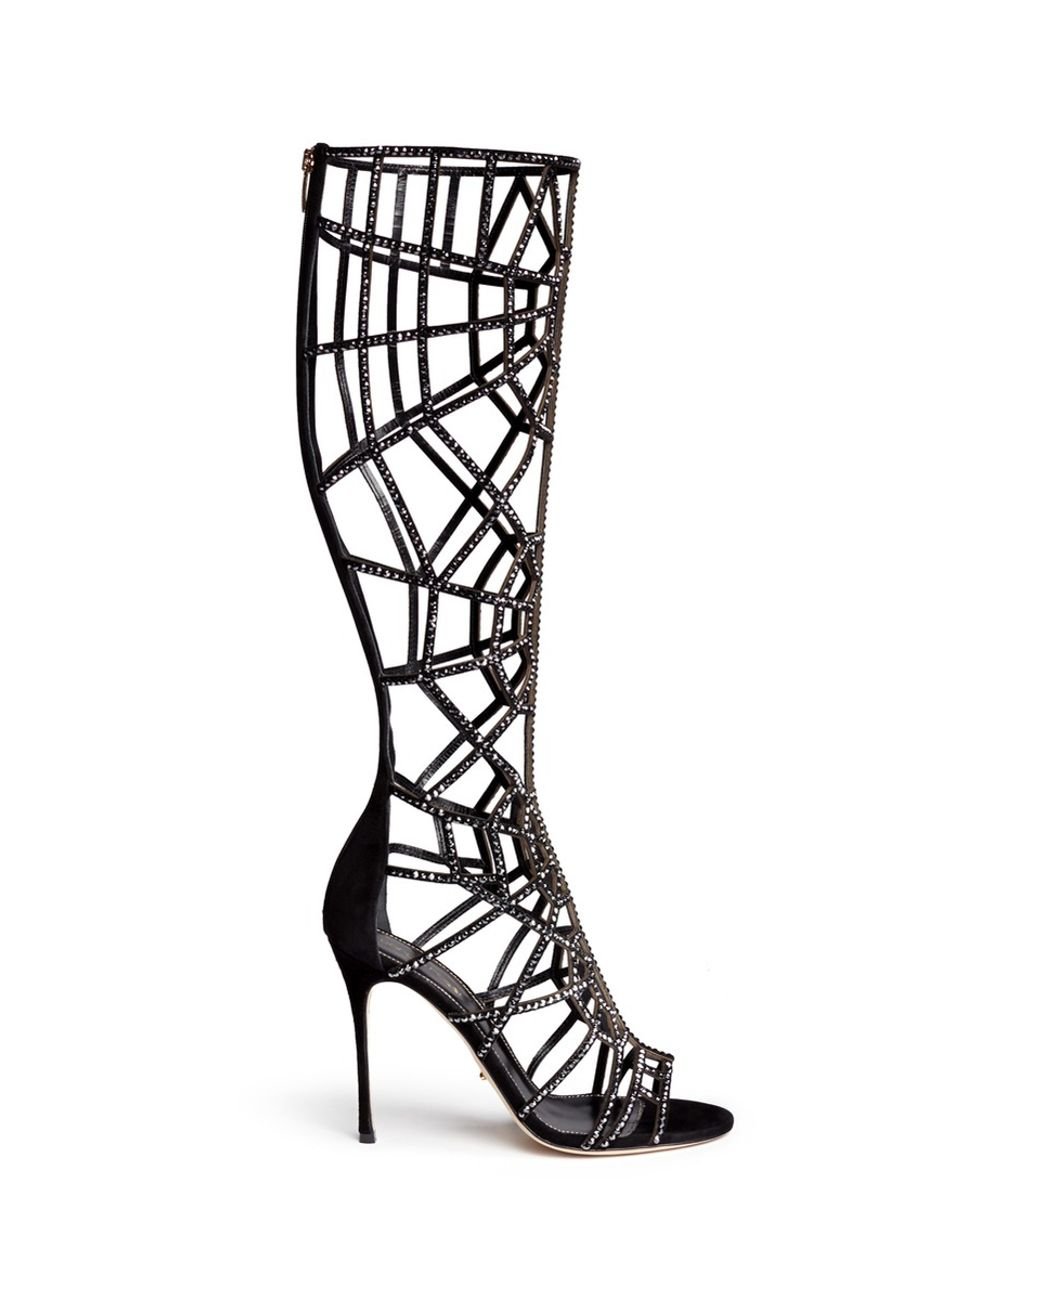 Sergio Rossi 'puzzle' Suede Strass Cutout Cage Sandal Boots in Black | Lyst